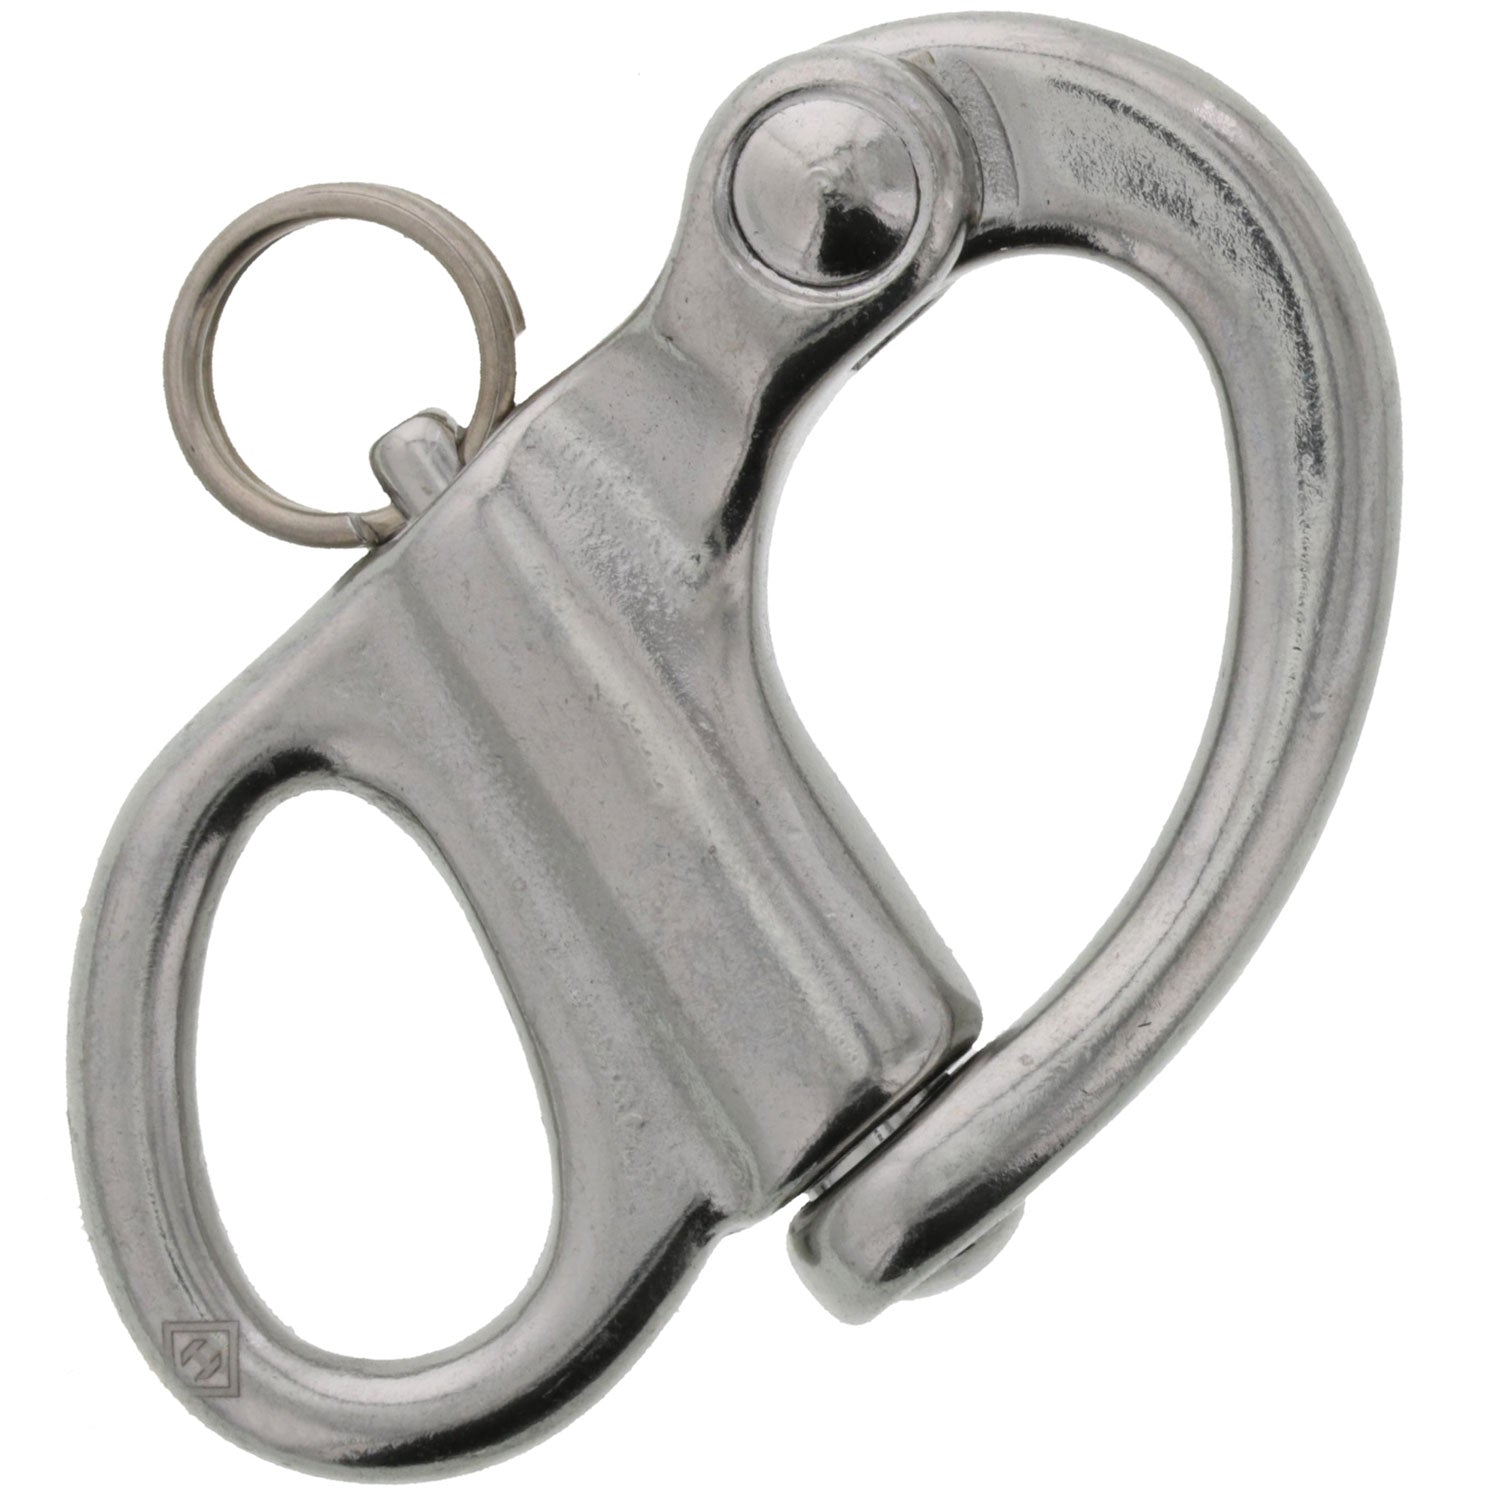 70mm Stainless Steel Fixed Snap Shackle